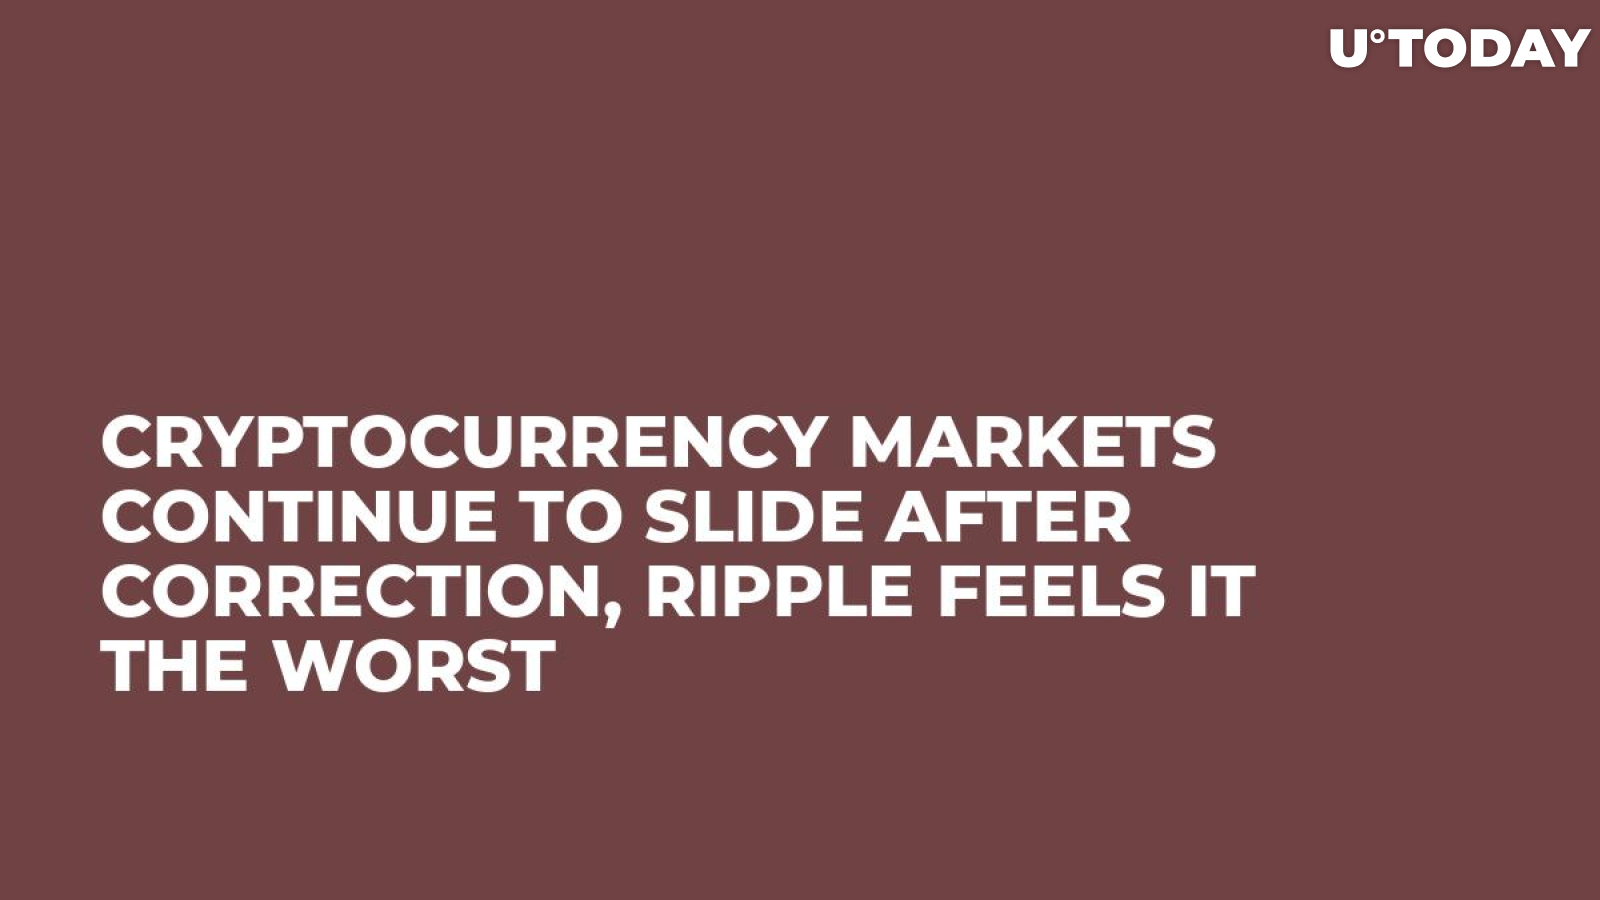 Cryptocurrency Markets Continue to Slide After Correction, Ripple Feels It the Worst